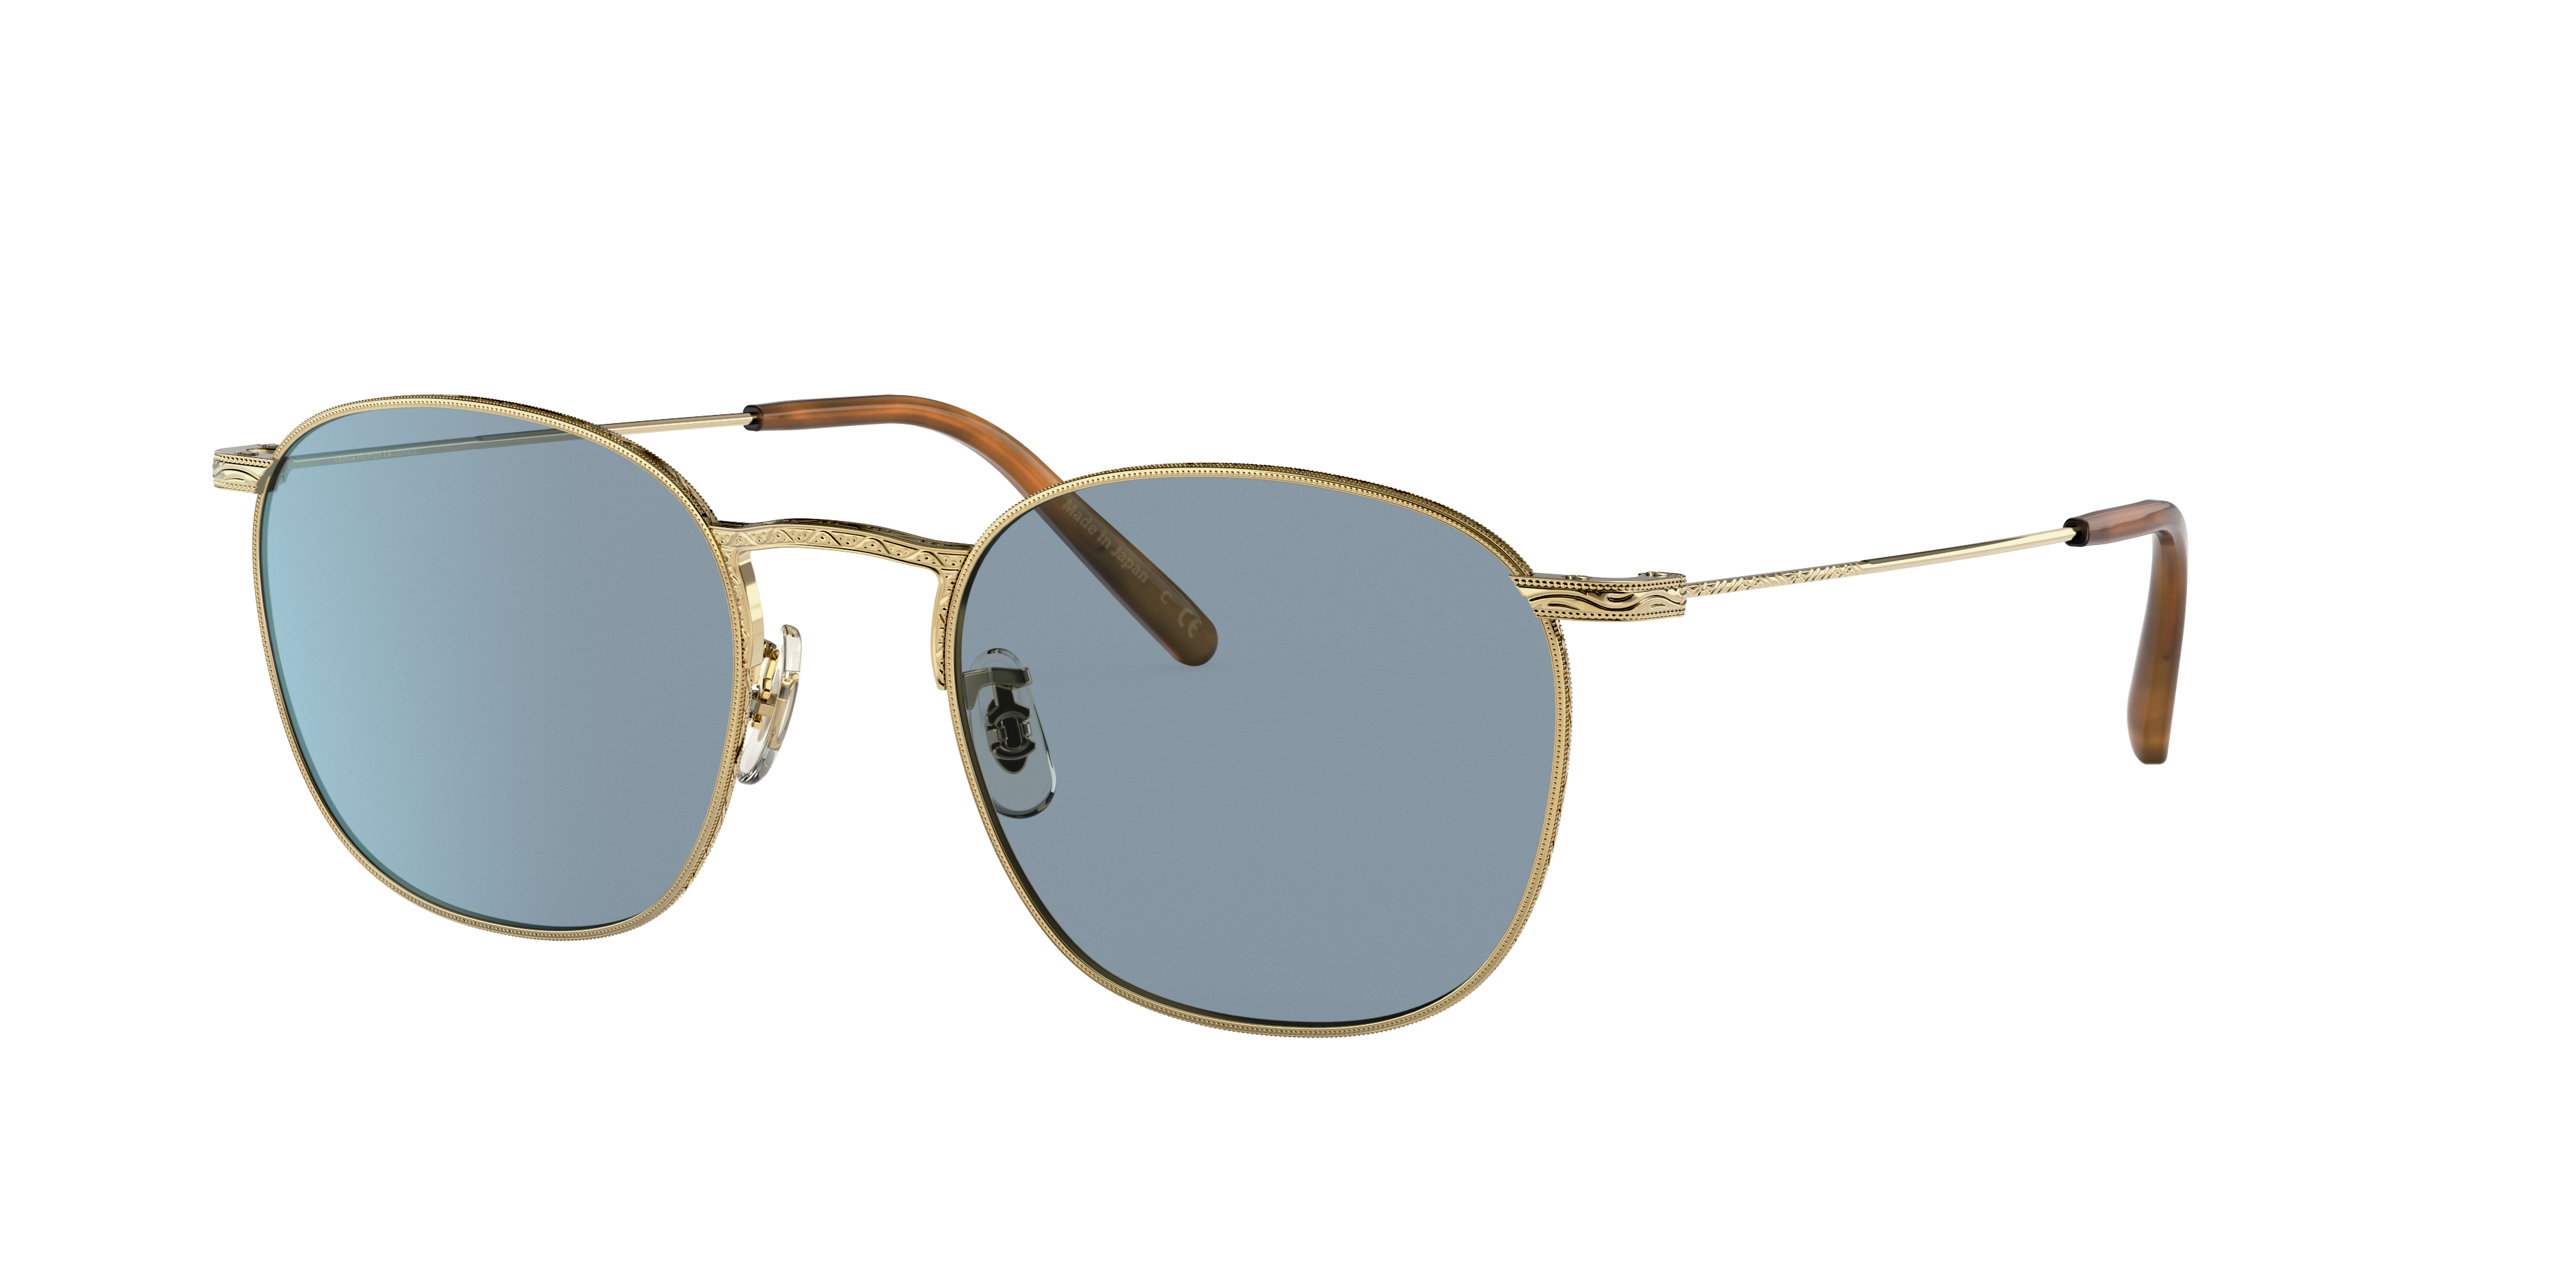 oliver peoples lenscrafters for Sale,Up To OFF 64%